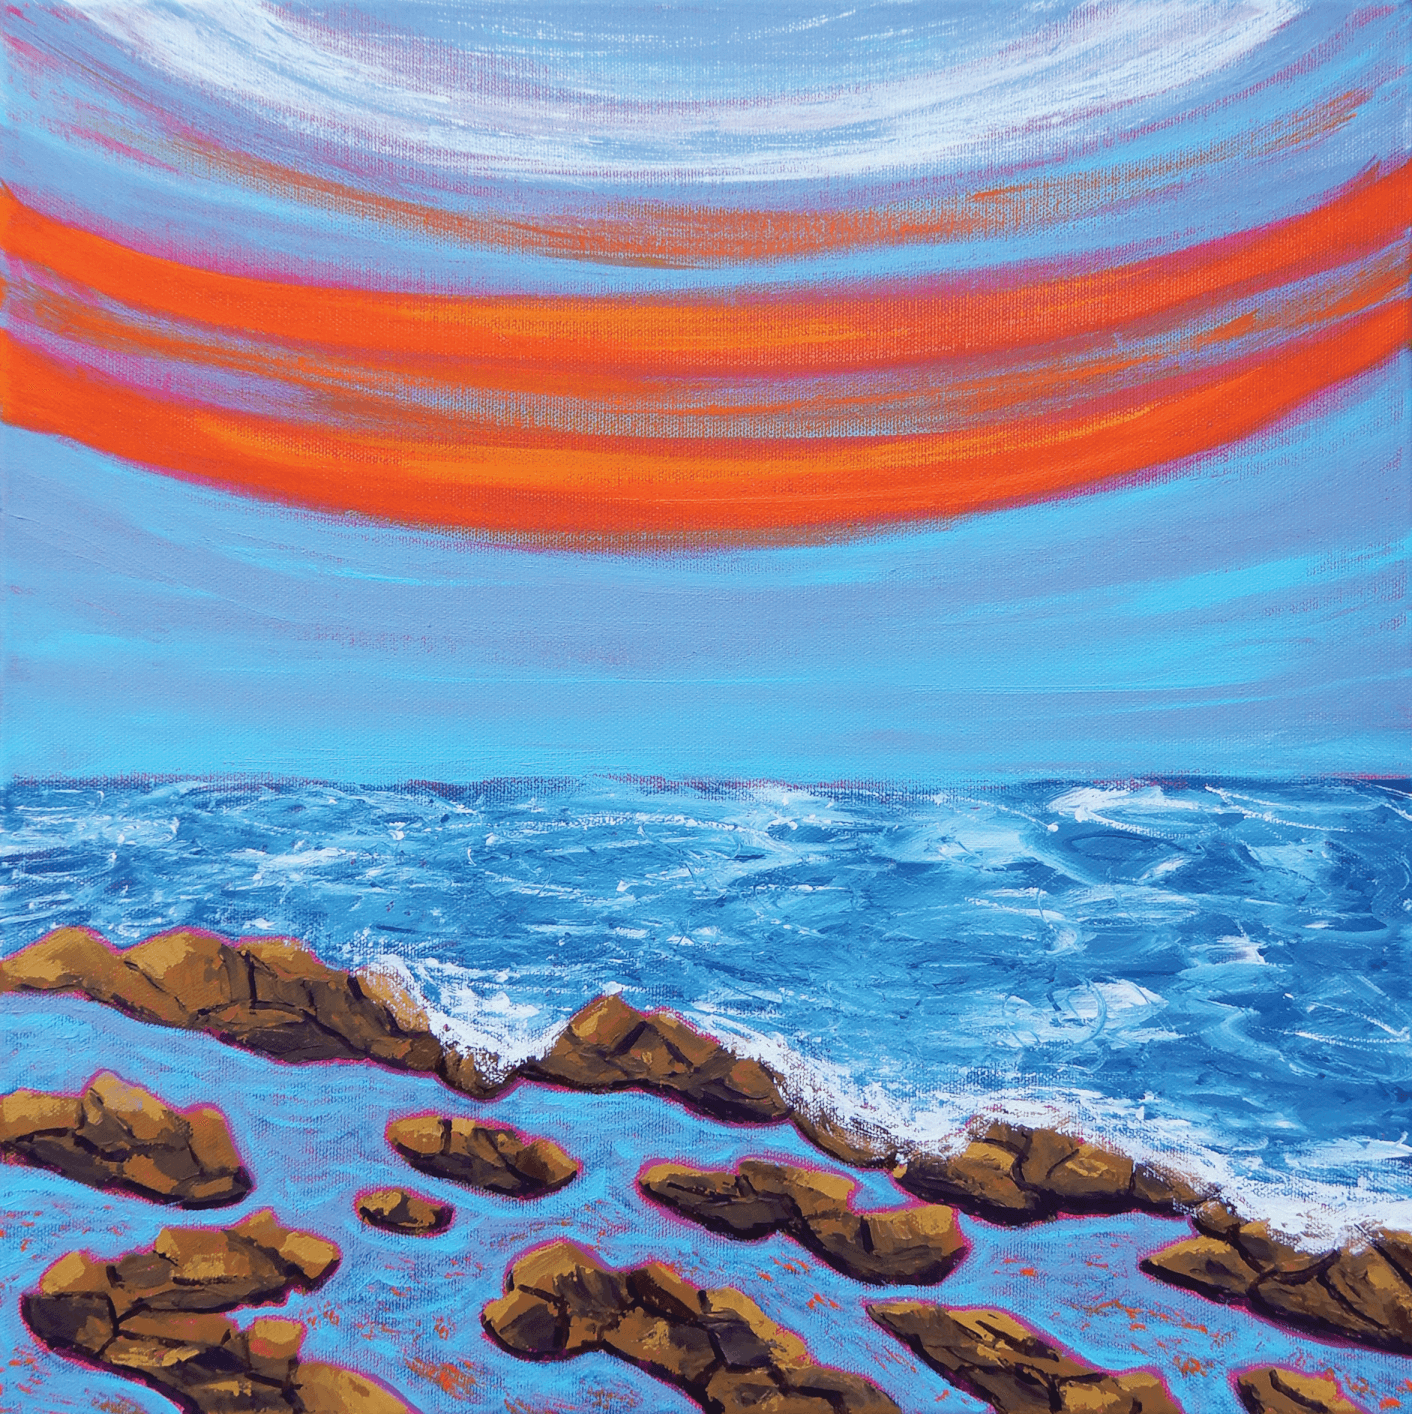 Tidal Pools at Sunset, acrylic on canvas, 16